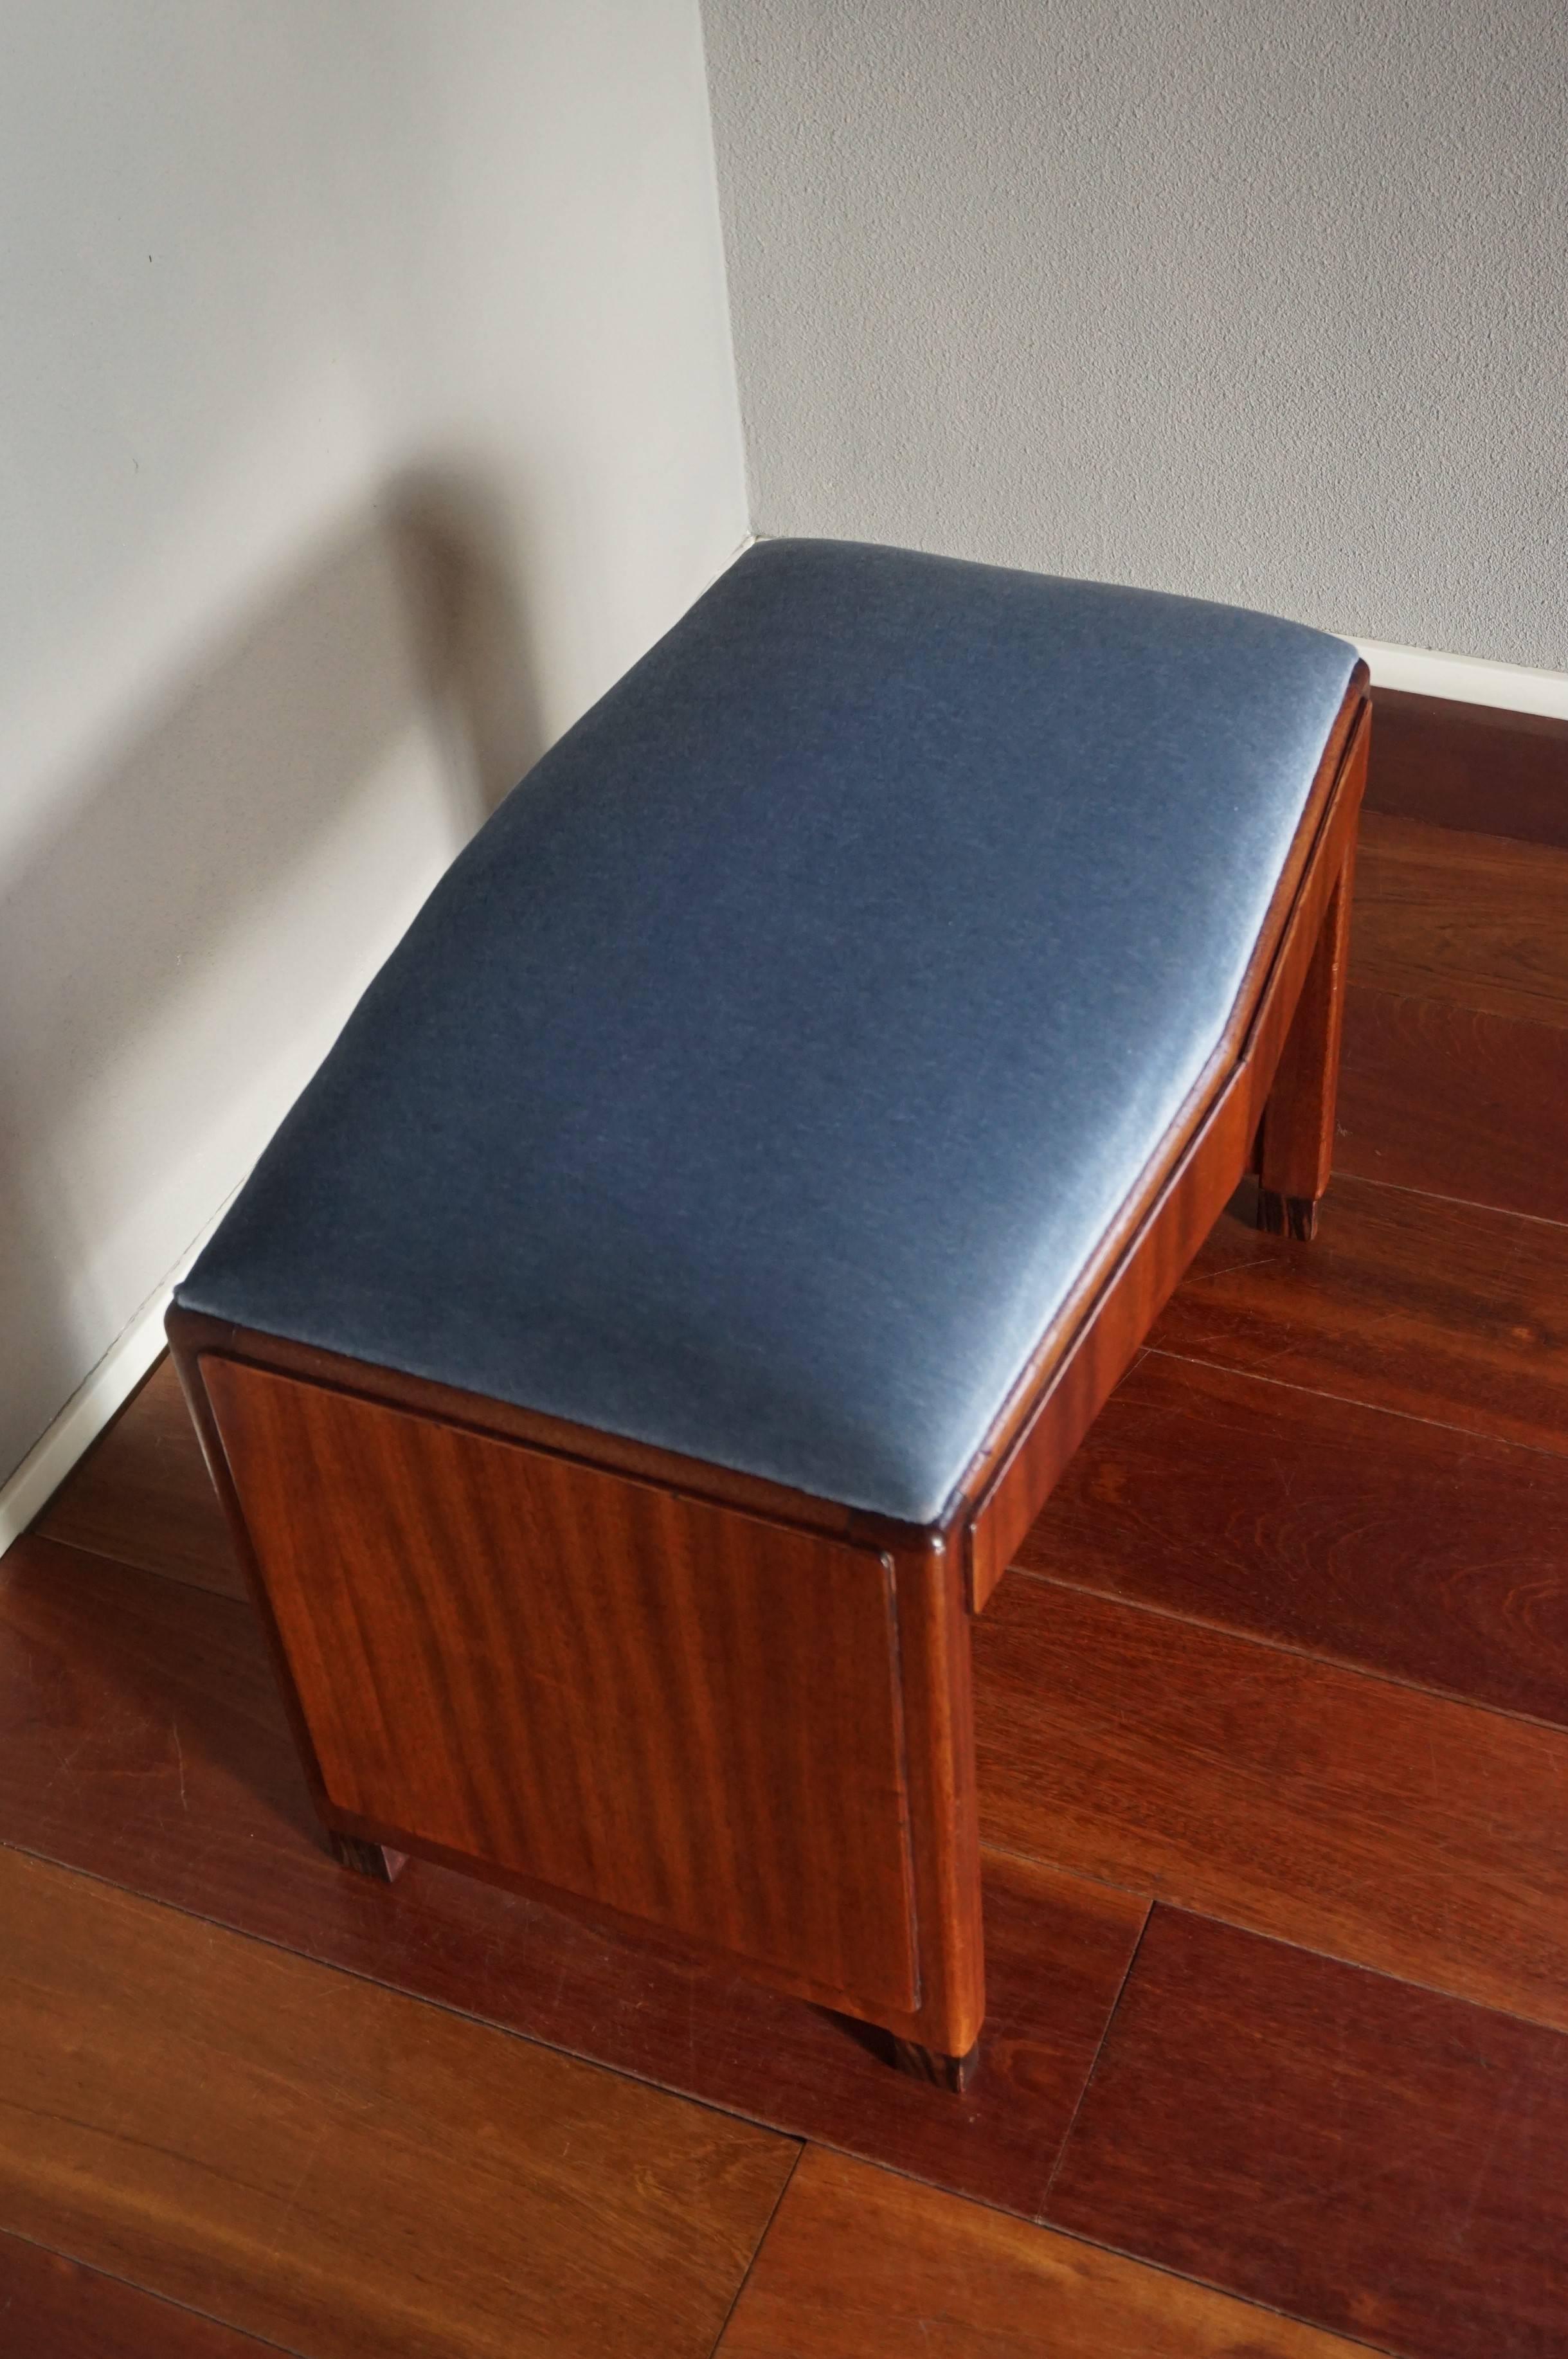 Dutch Stunning Mahogany Art Deco Hall Bench or Stool with Perfect Grey-Blue Upholstery